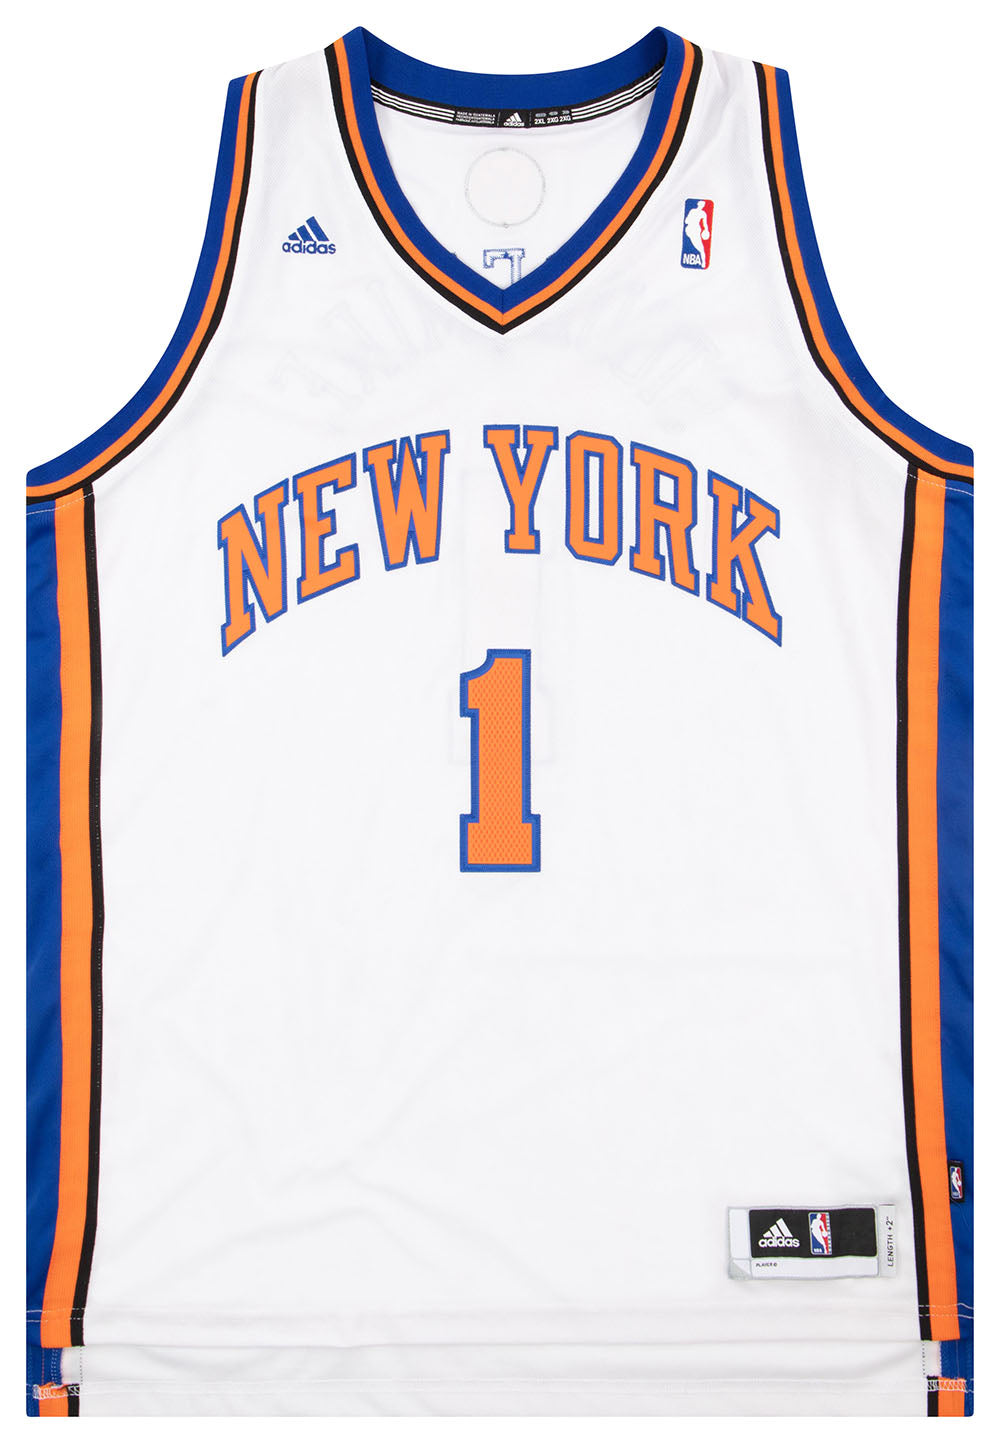 The Hoboken Shop Where Old Knicks Jerseys Go to Die